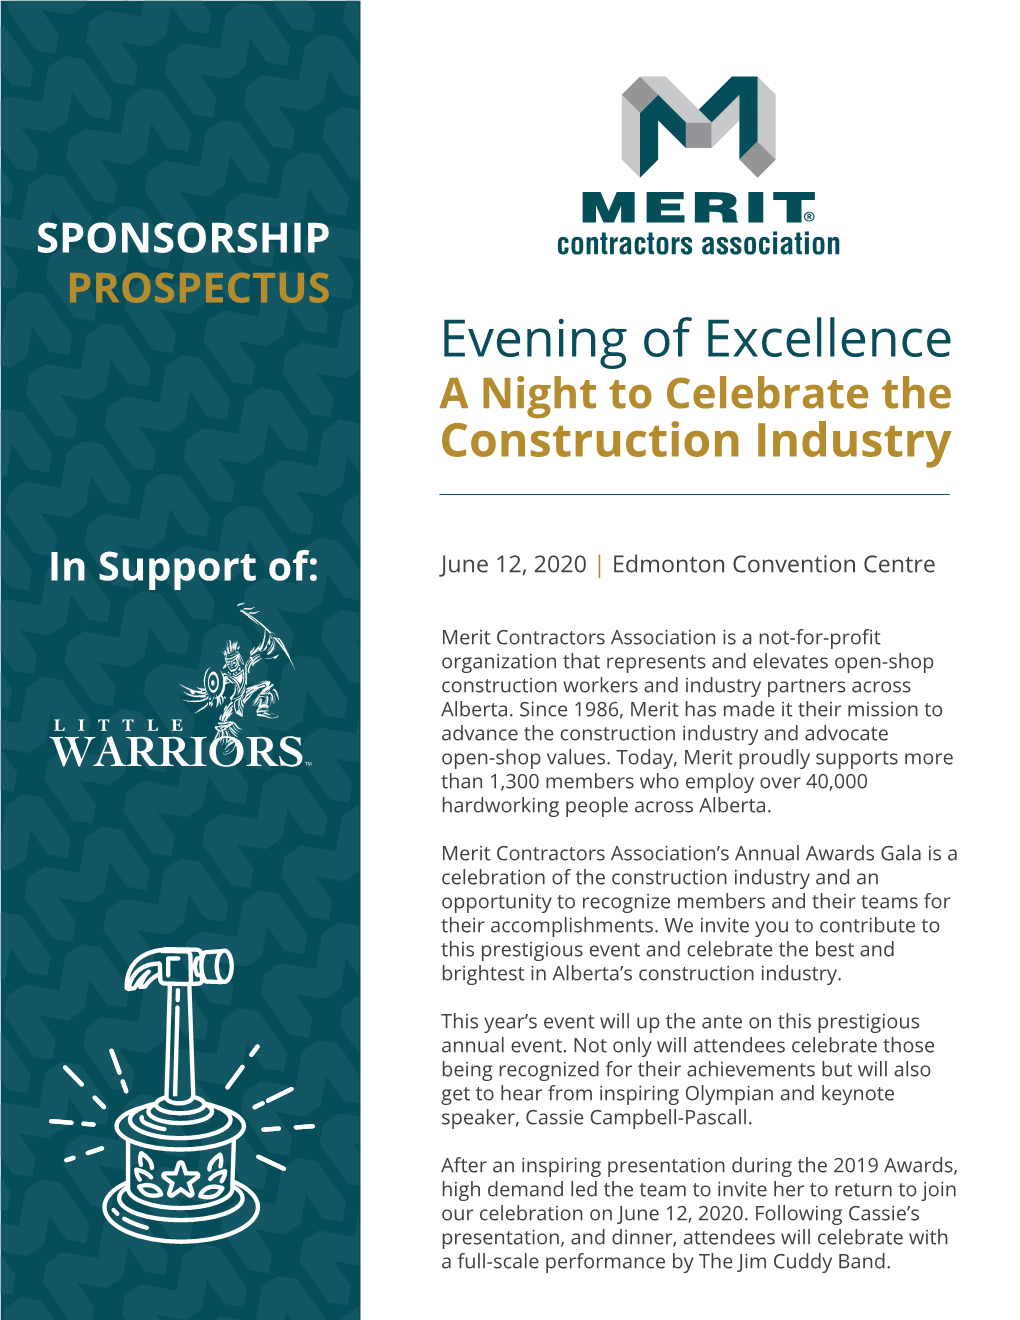 Evening of Excellence a Night to Celebrate the Construction Industry